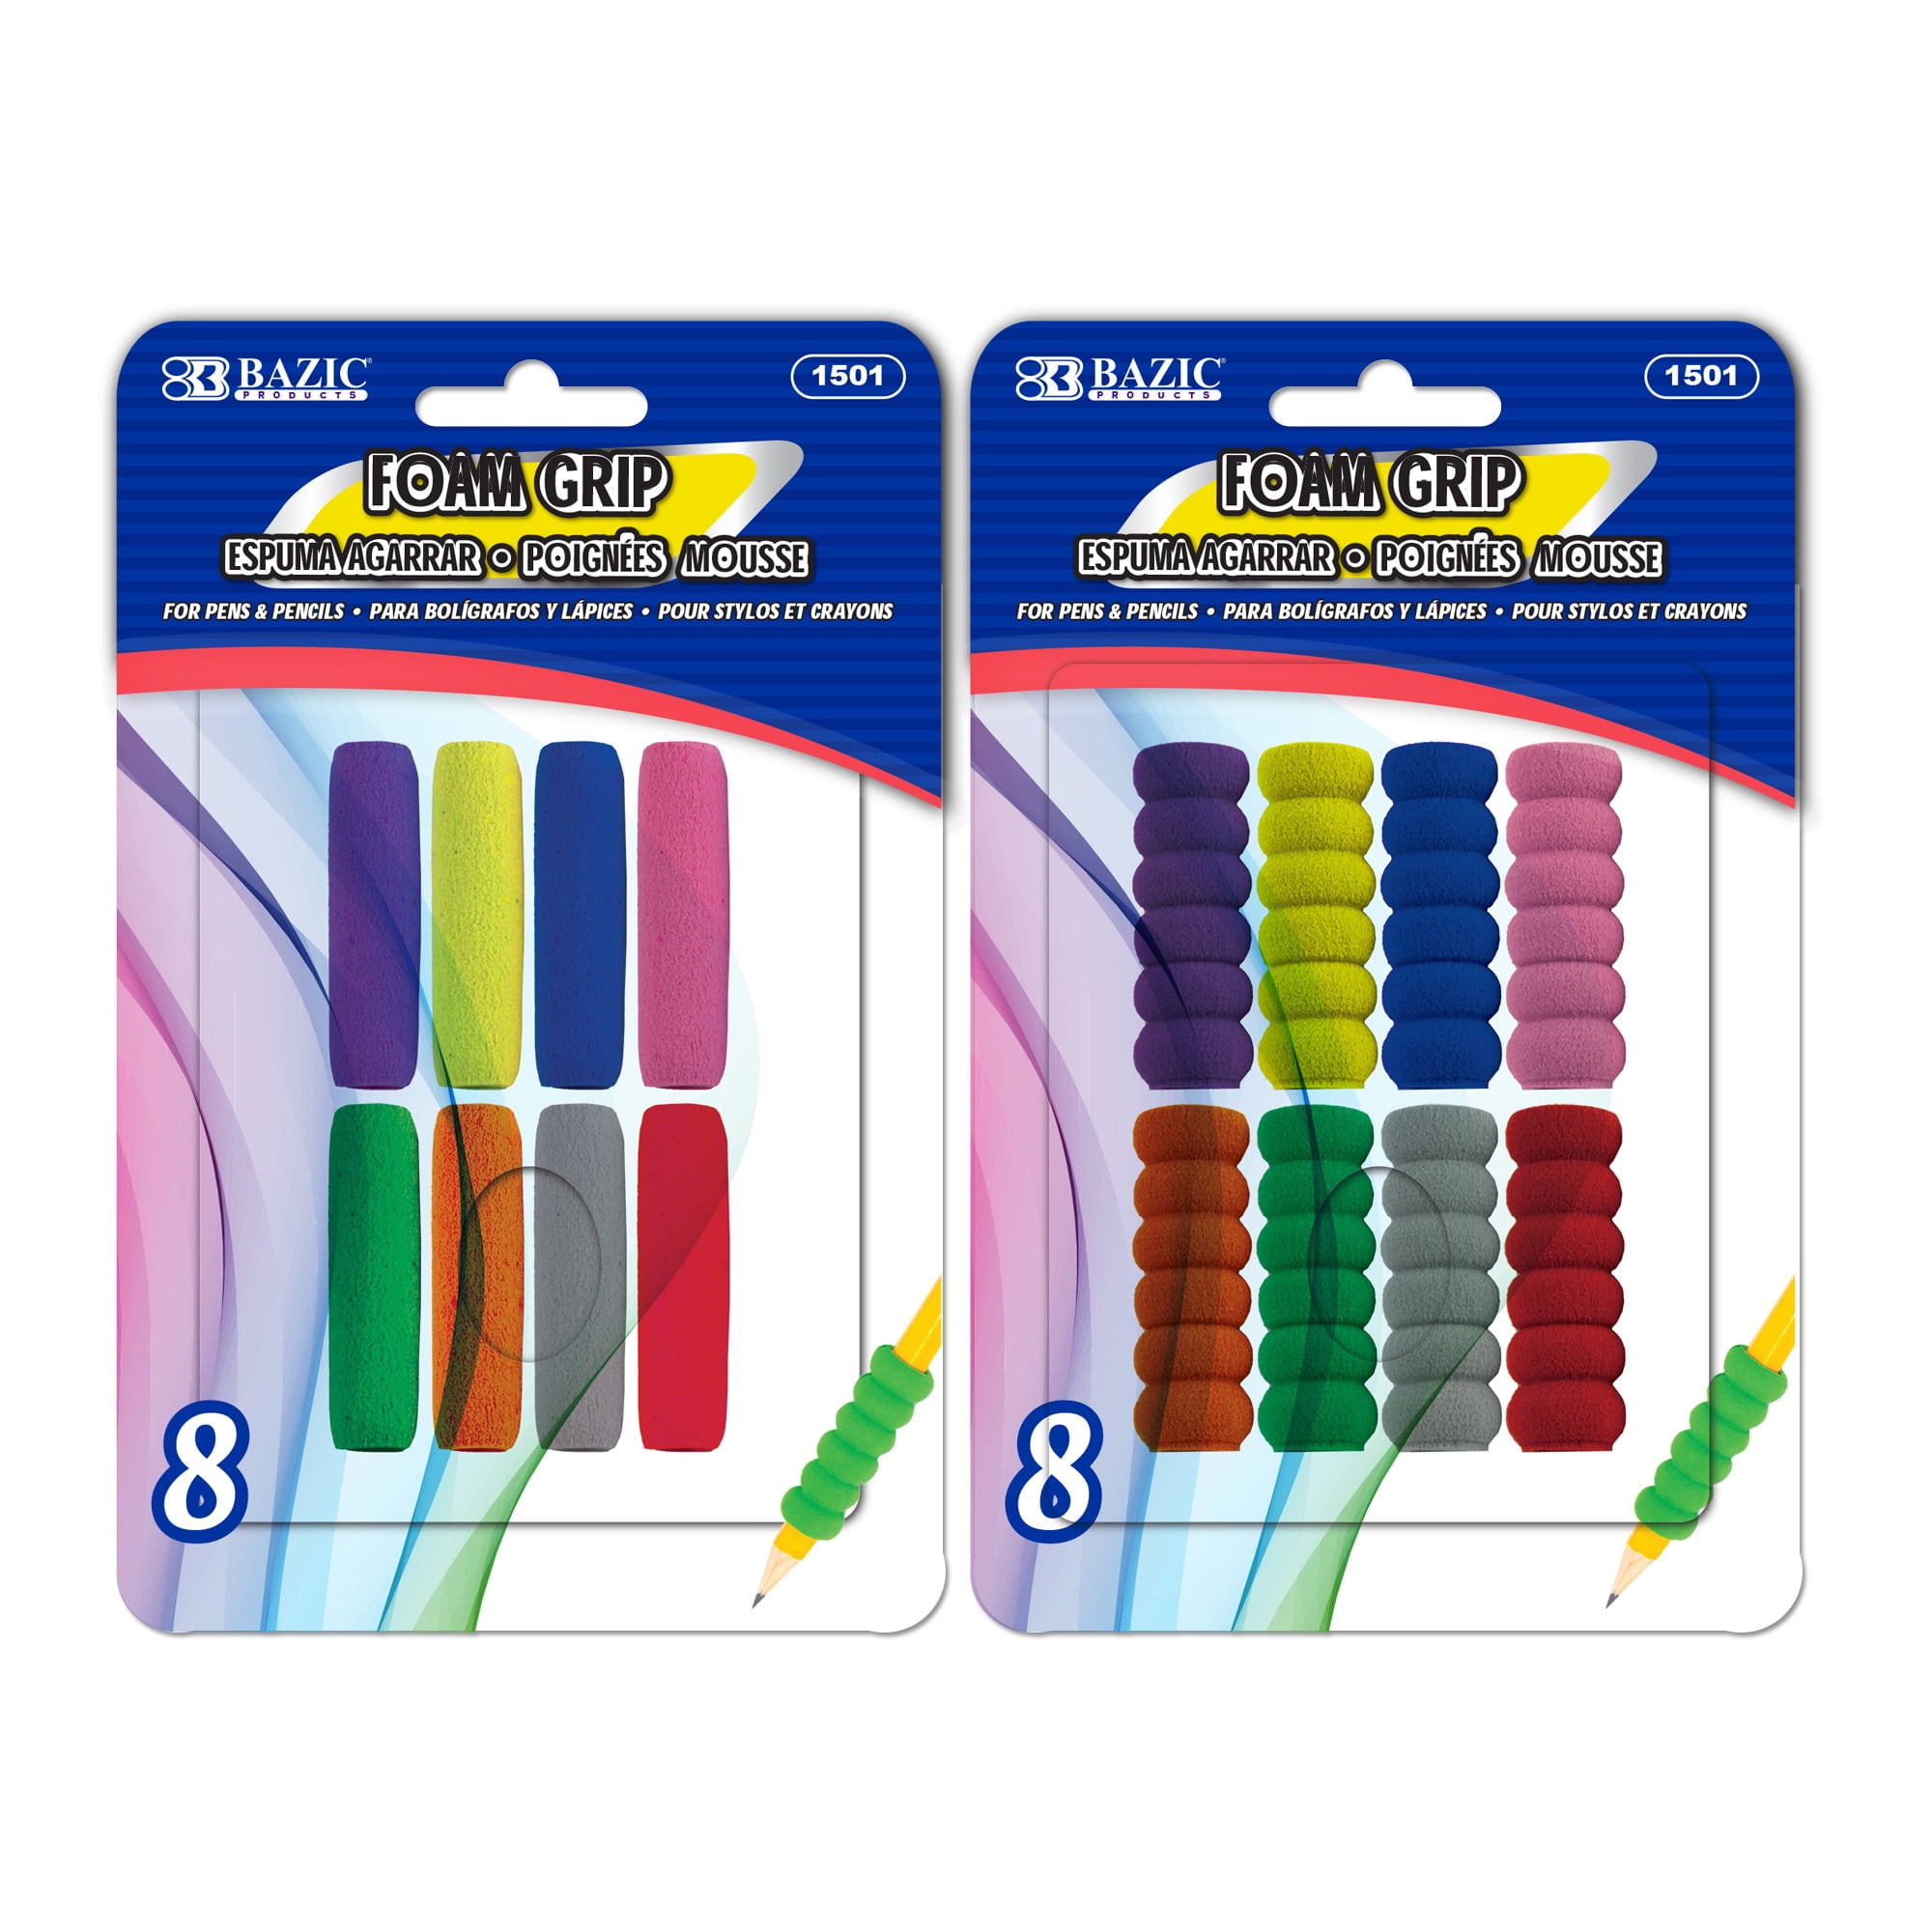 tpg003 The Pencil Grip 3 Step Training Kit 3/pack tpg-003 Assorted 